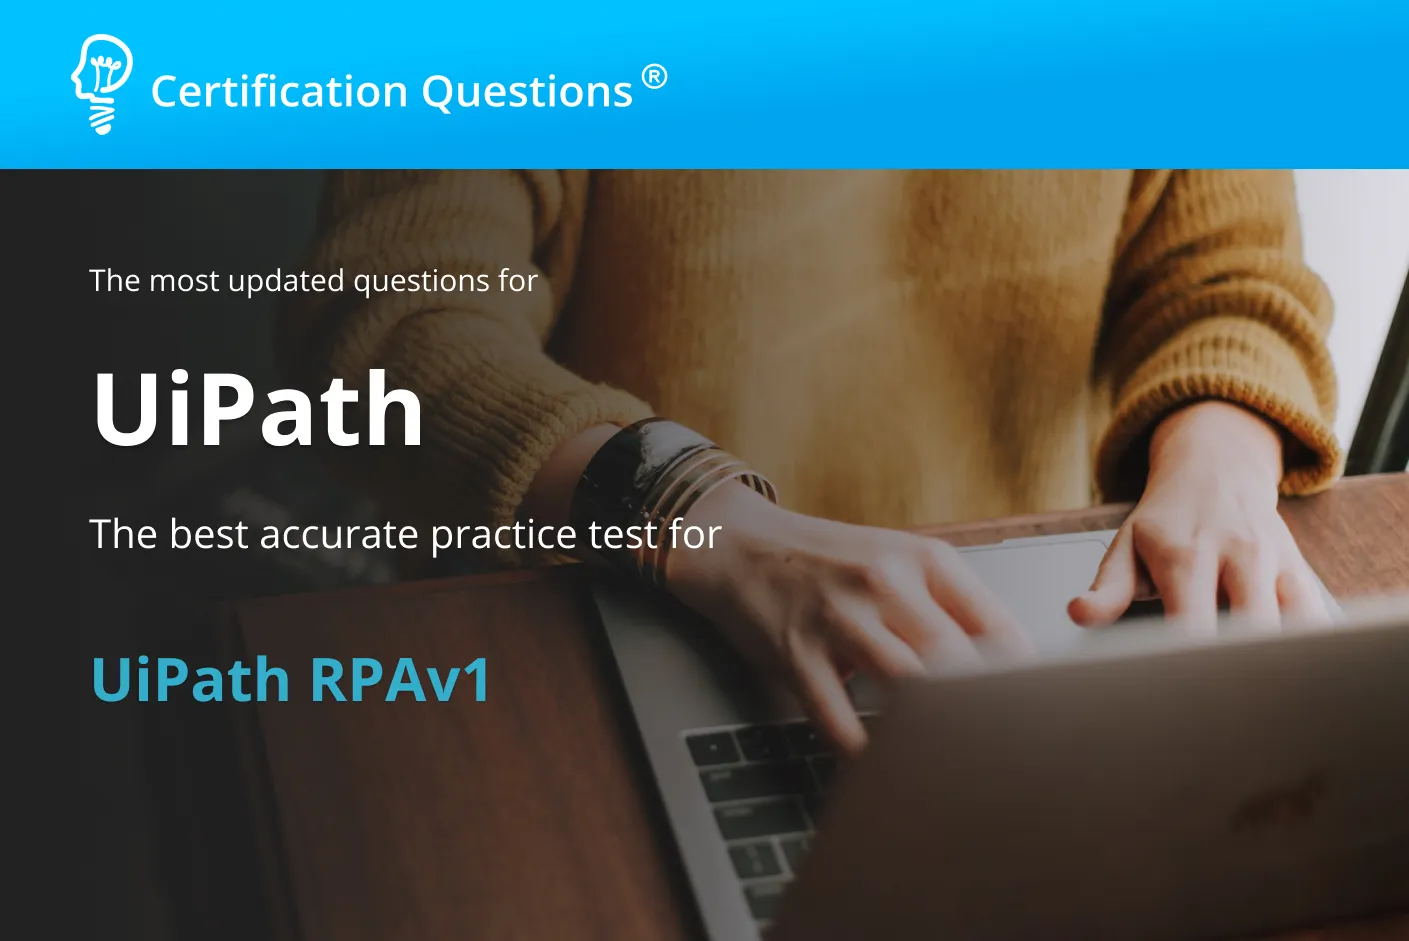 This image is related to uipath rpa associate exam questions